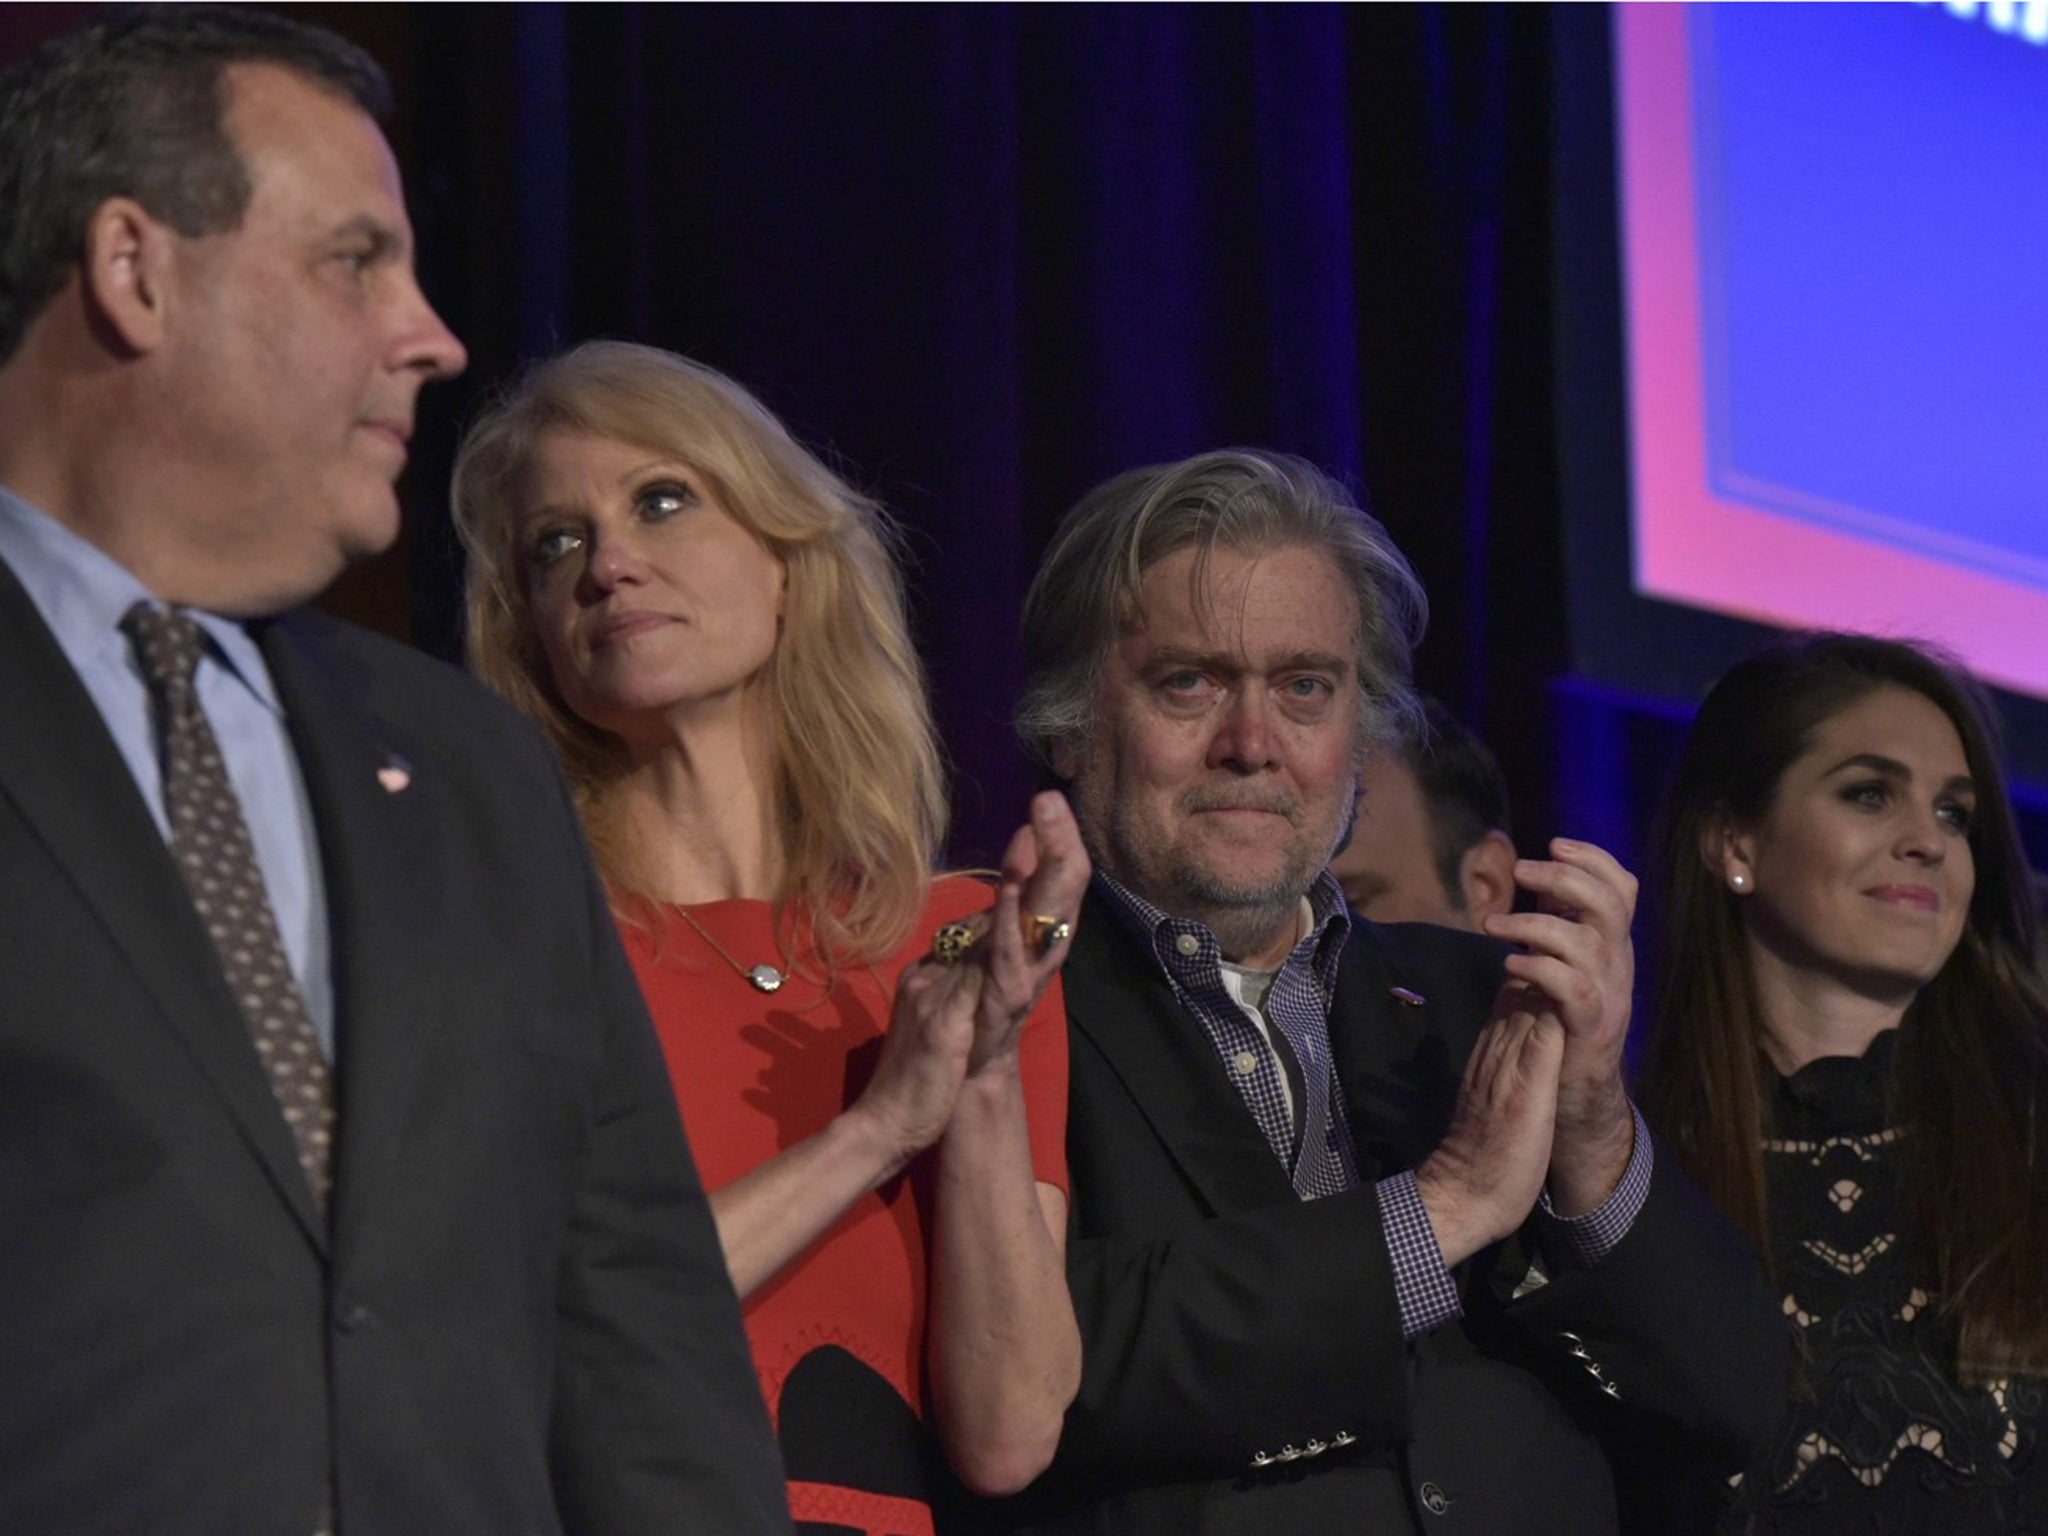 Campaign chief executive Stephen Bannon (centre) at Trump's victory party